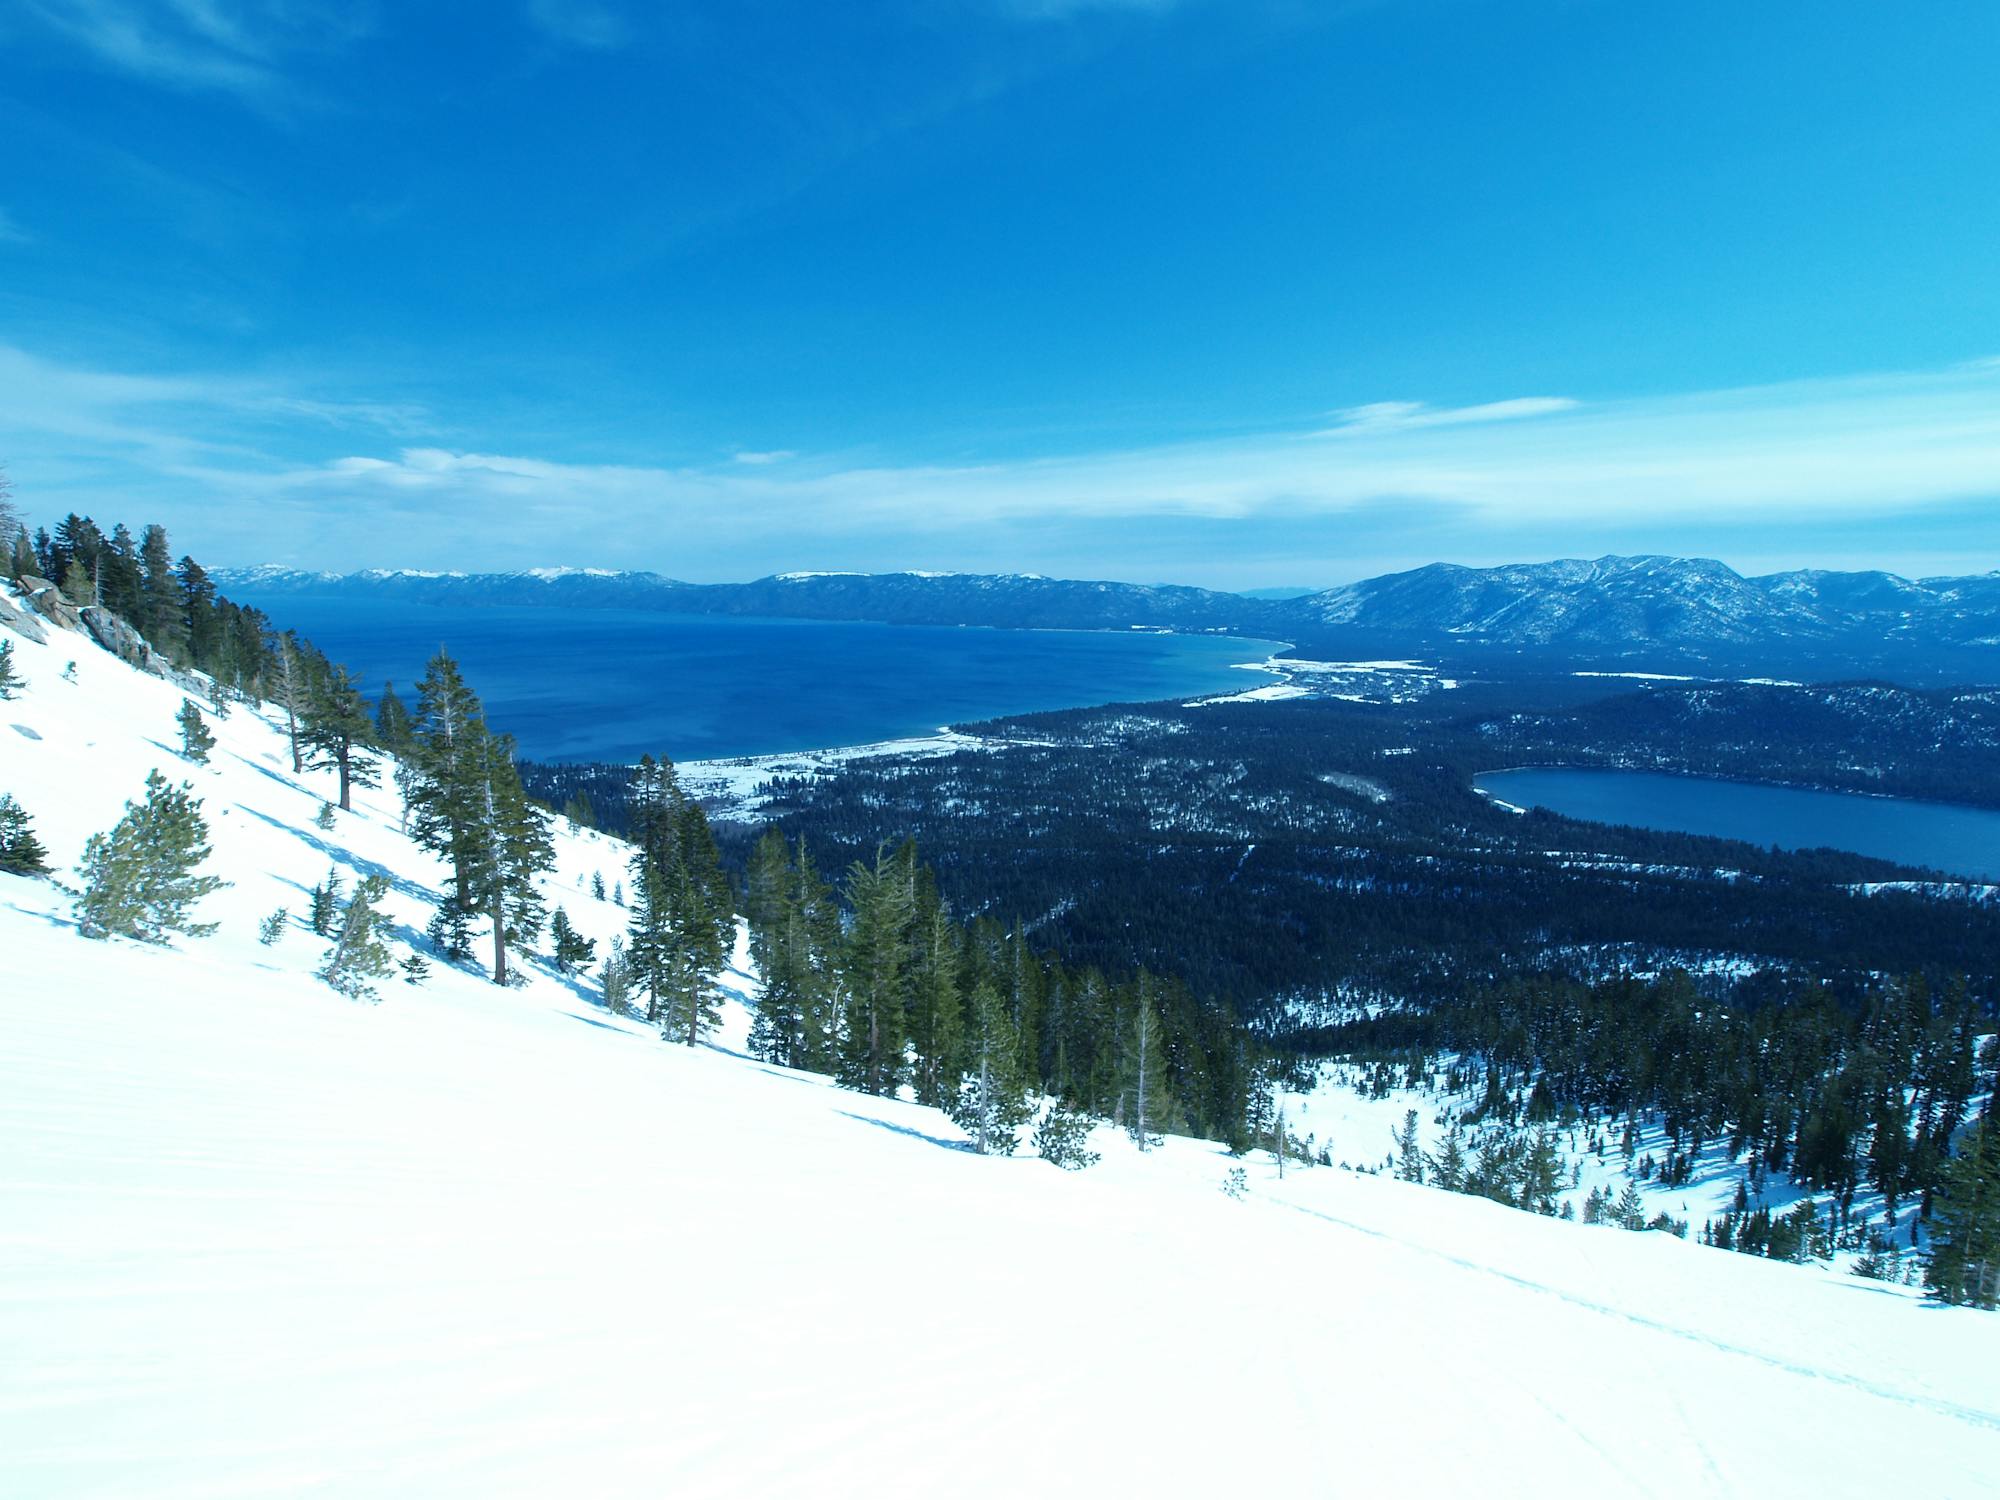 Perfect snow and a blue lake - welcome to Tahoe!